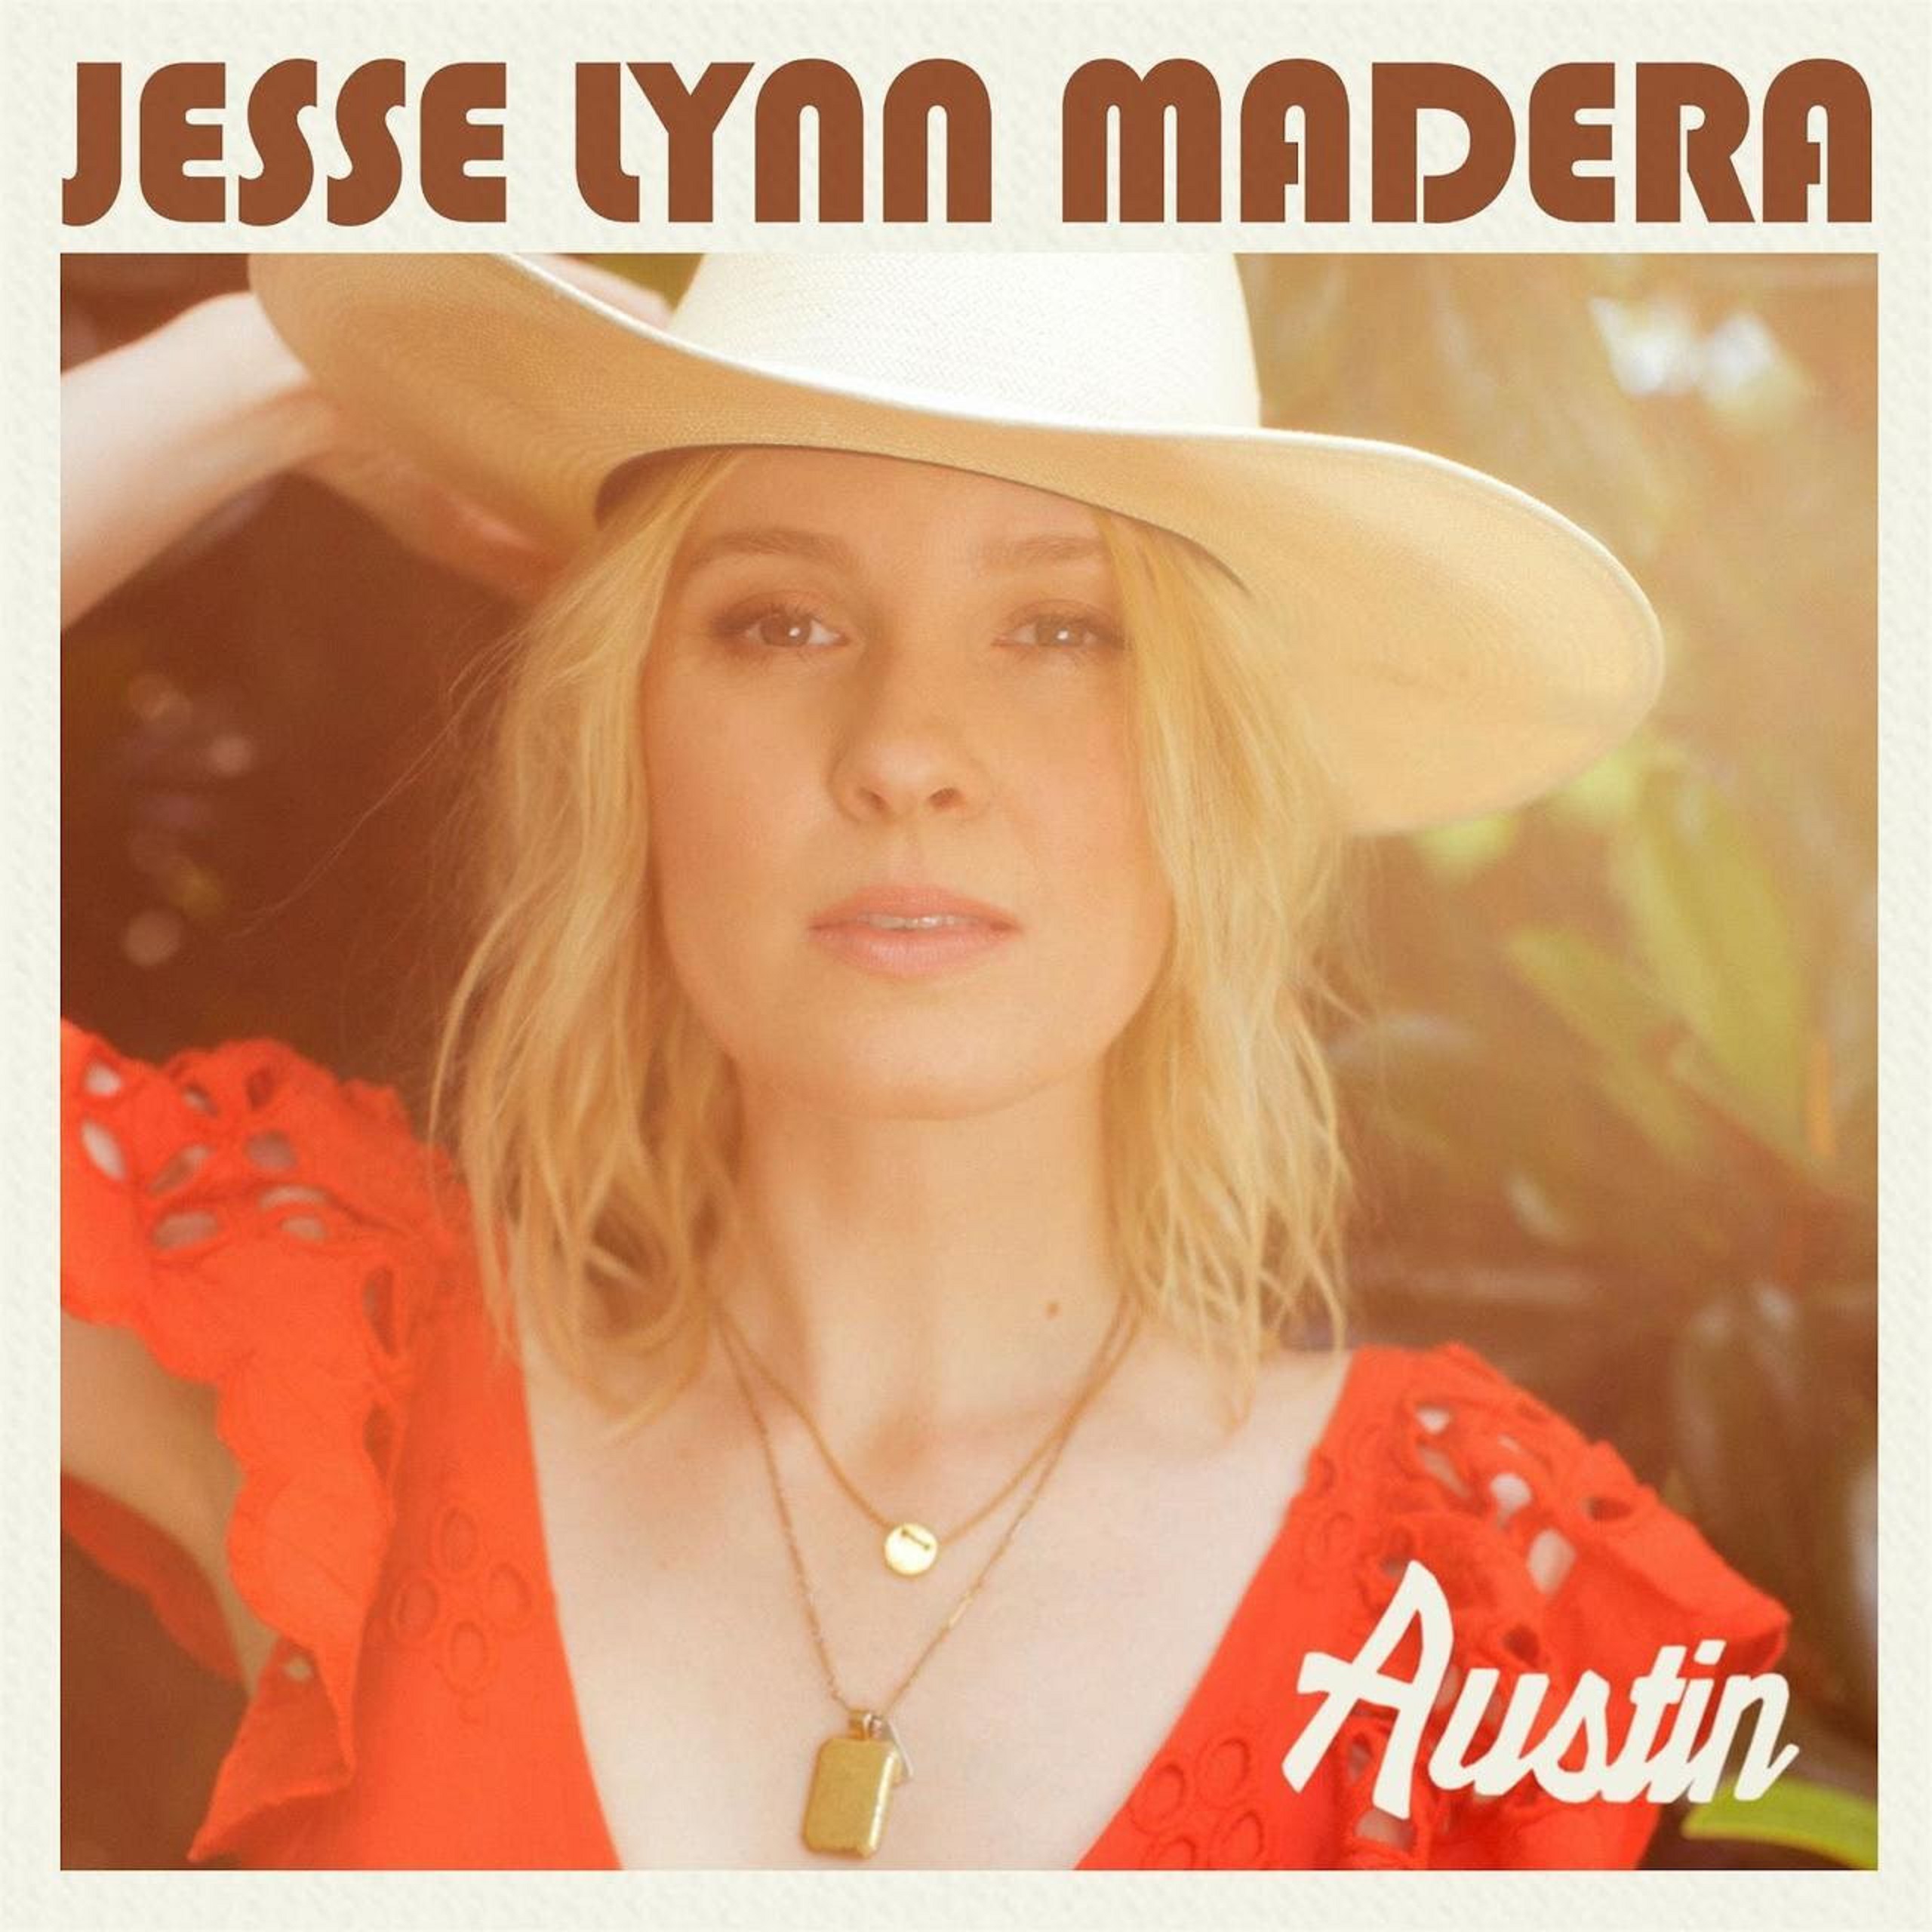 Jesse Lynn Madera Unveils 'Austin' Out January, 19 First Track from Upcoming Album Speed of Sound